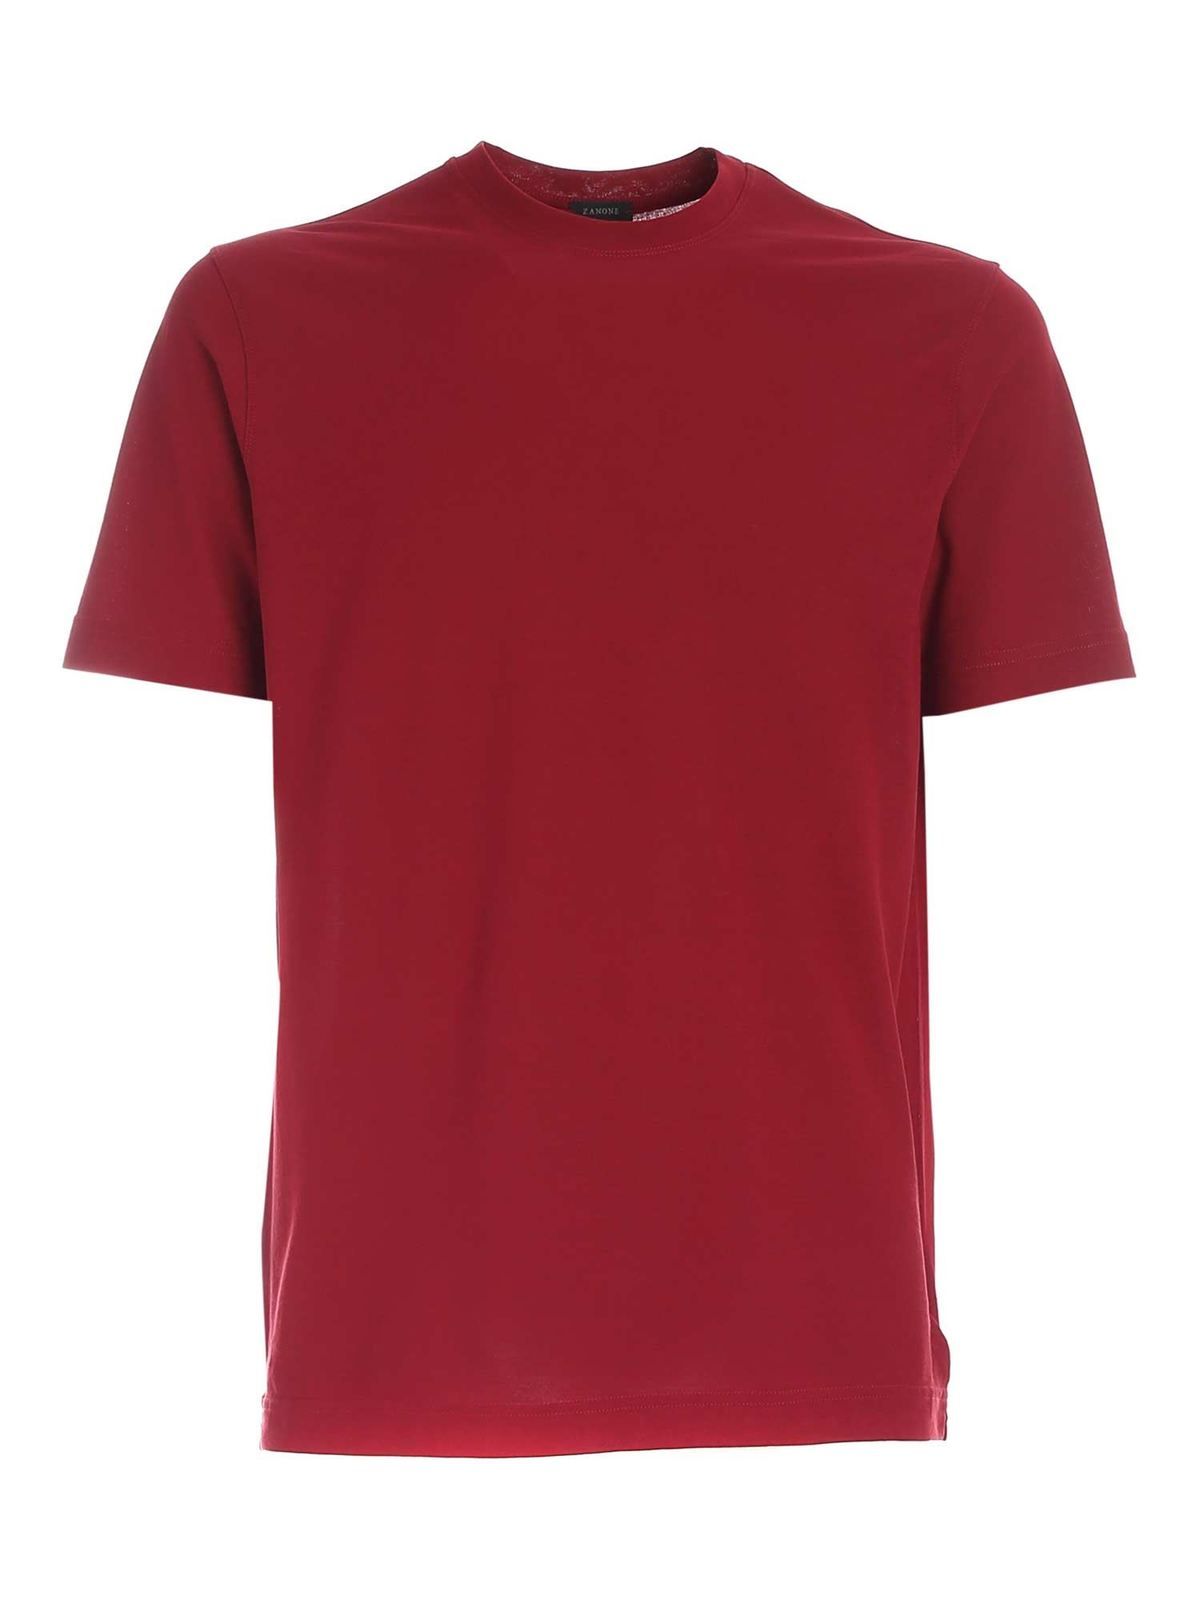 Zanone Cottons BASIC T-SHIRT IN BURGUNDY COLOR